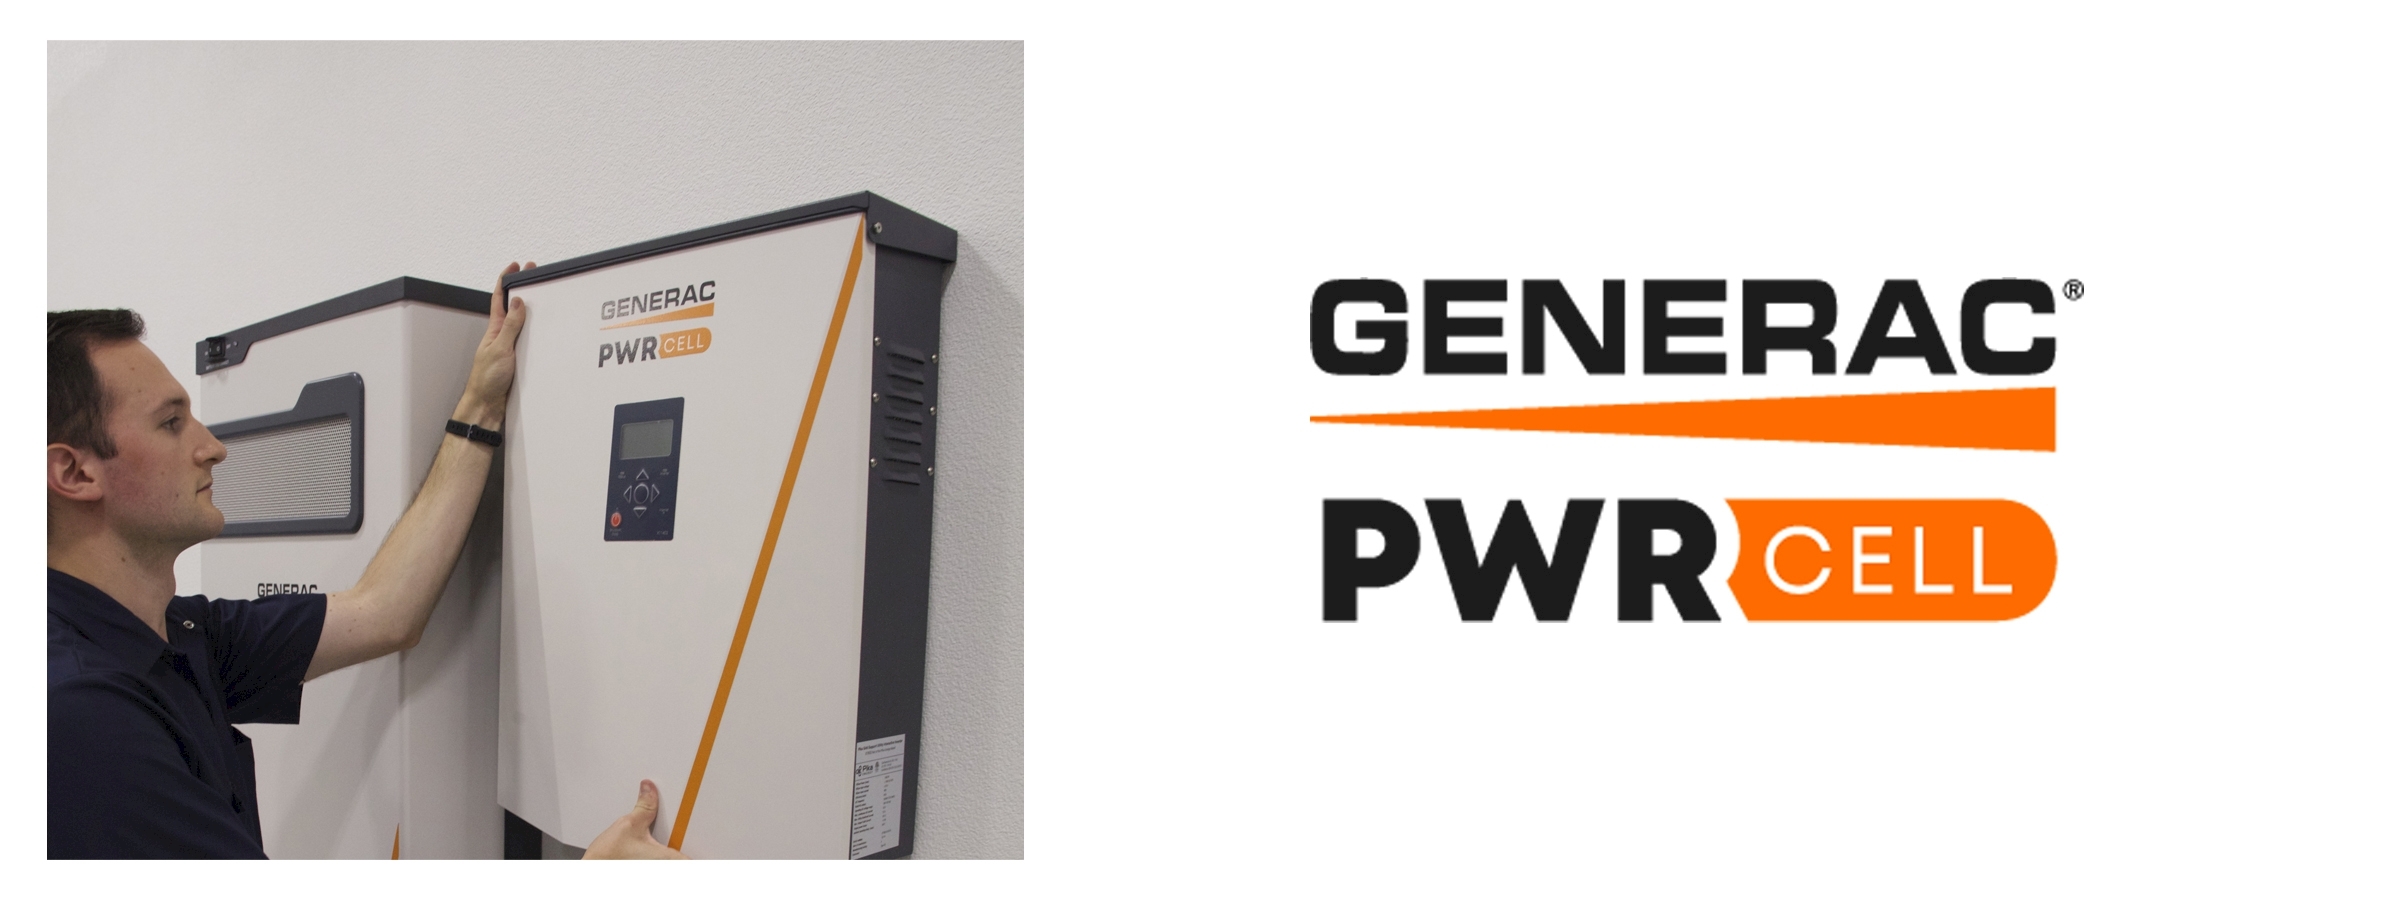 Boston Solar partners with Generac to install PWRcell battery systems in Massachusetts